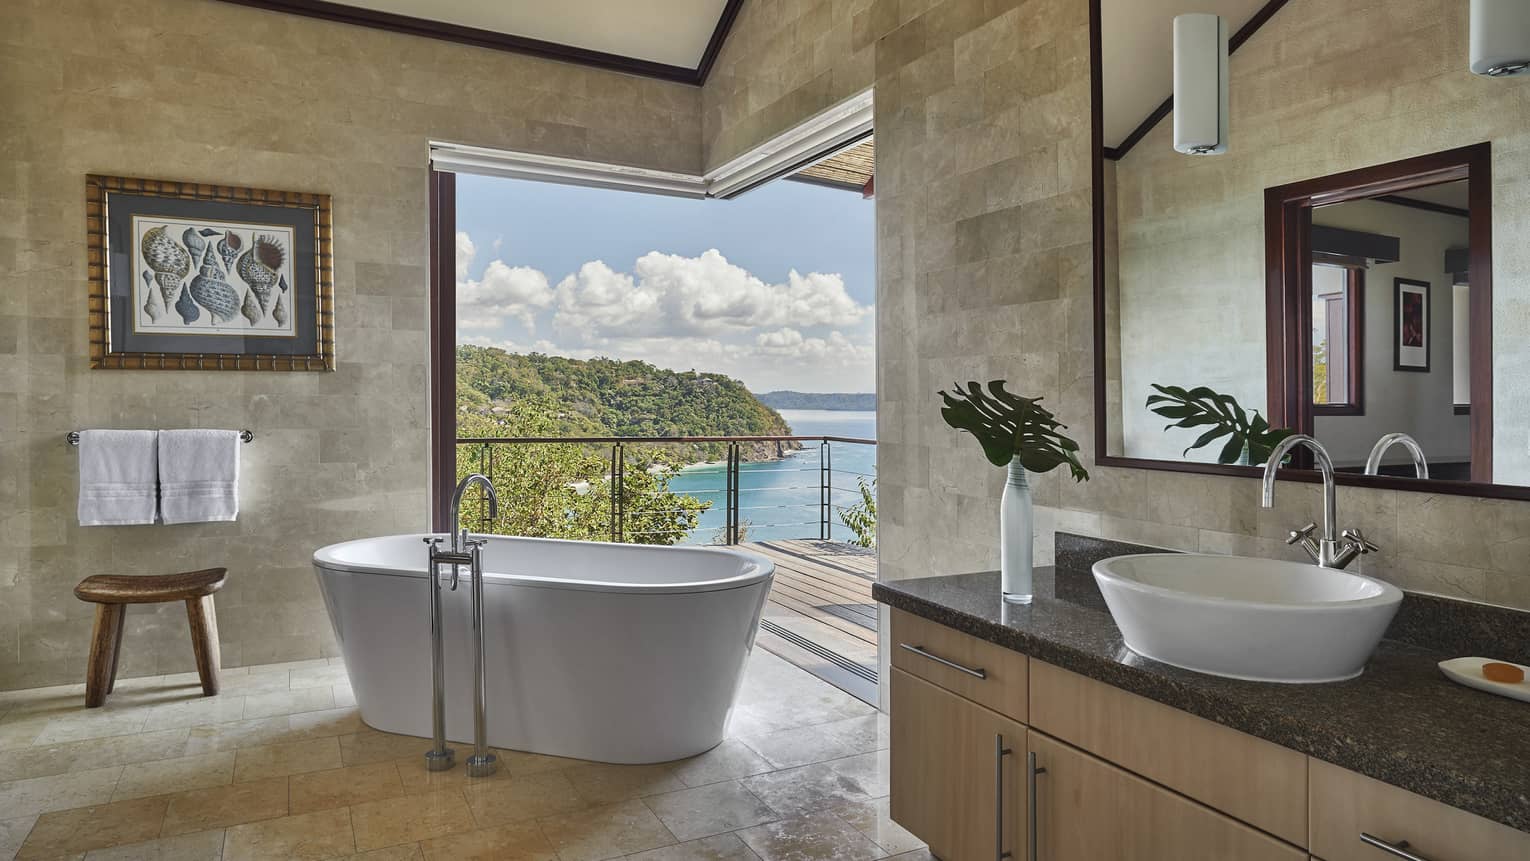 A large oval tub sits at the entrance of a spacious balcony overlooking the ocean.